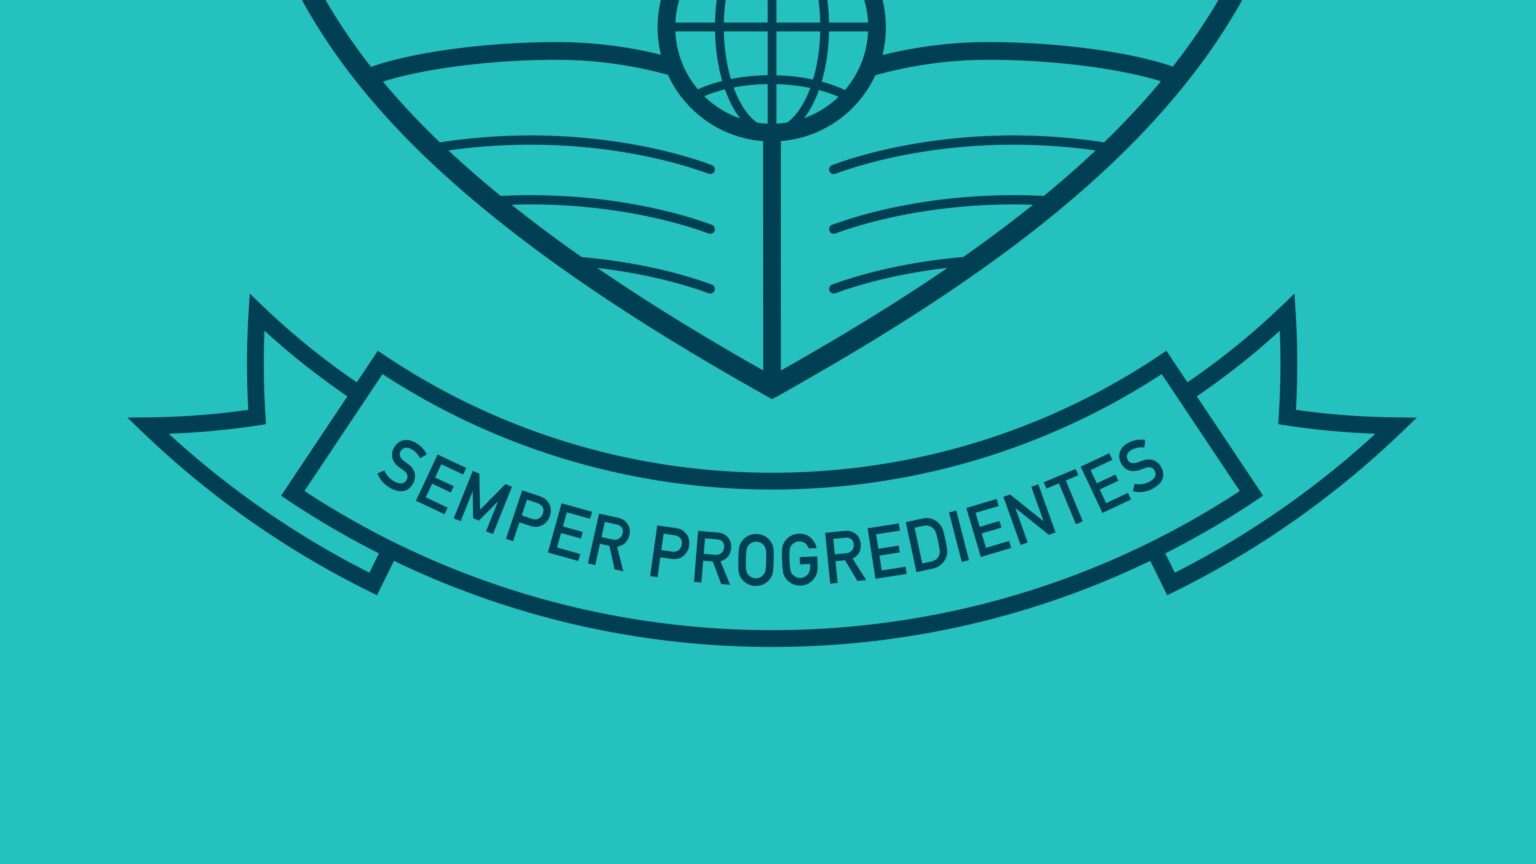 Zoomed in view of the Edinburgh Surgery Online logo on a teal background.